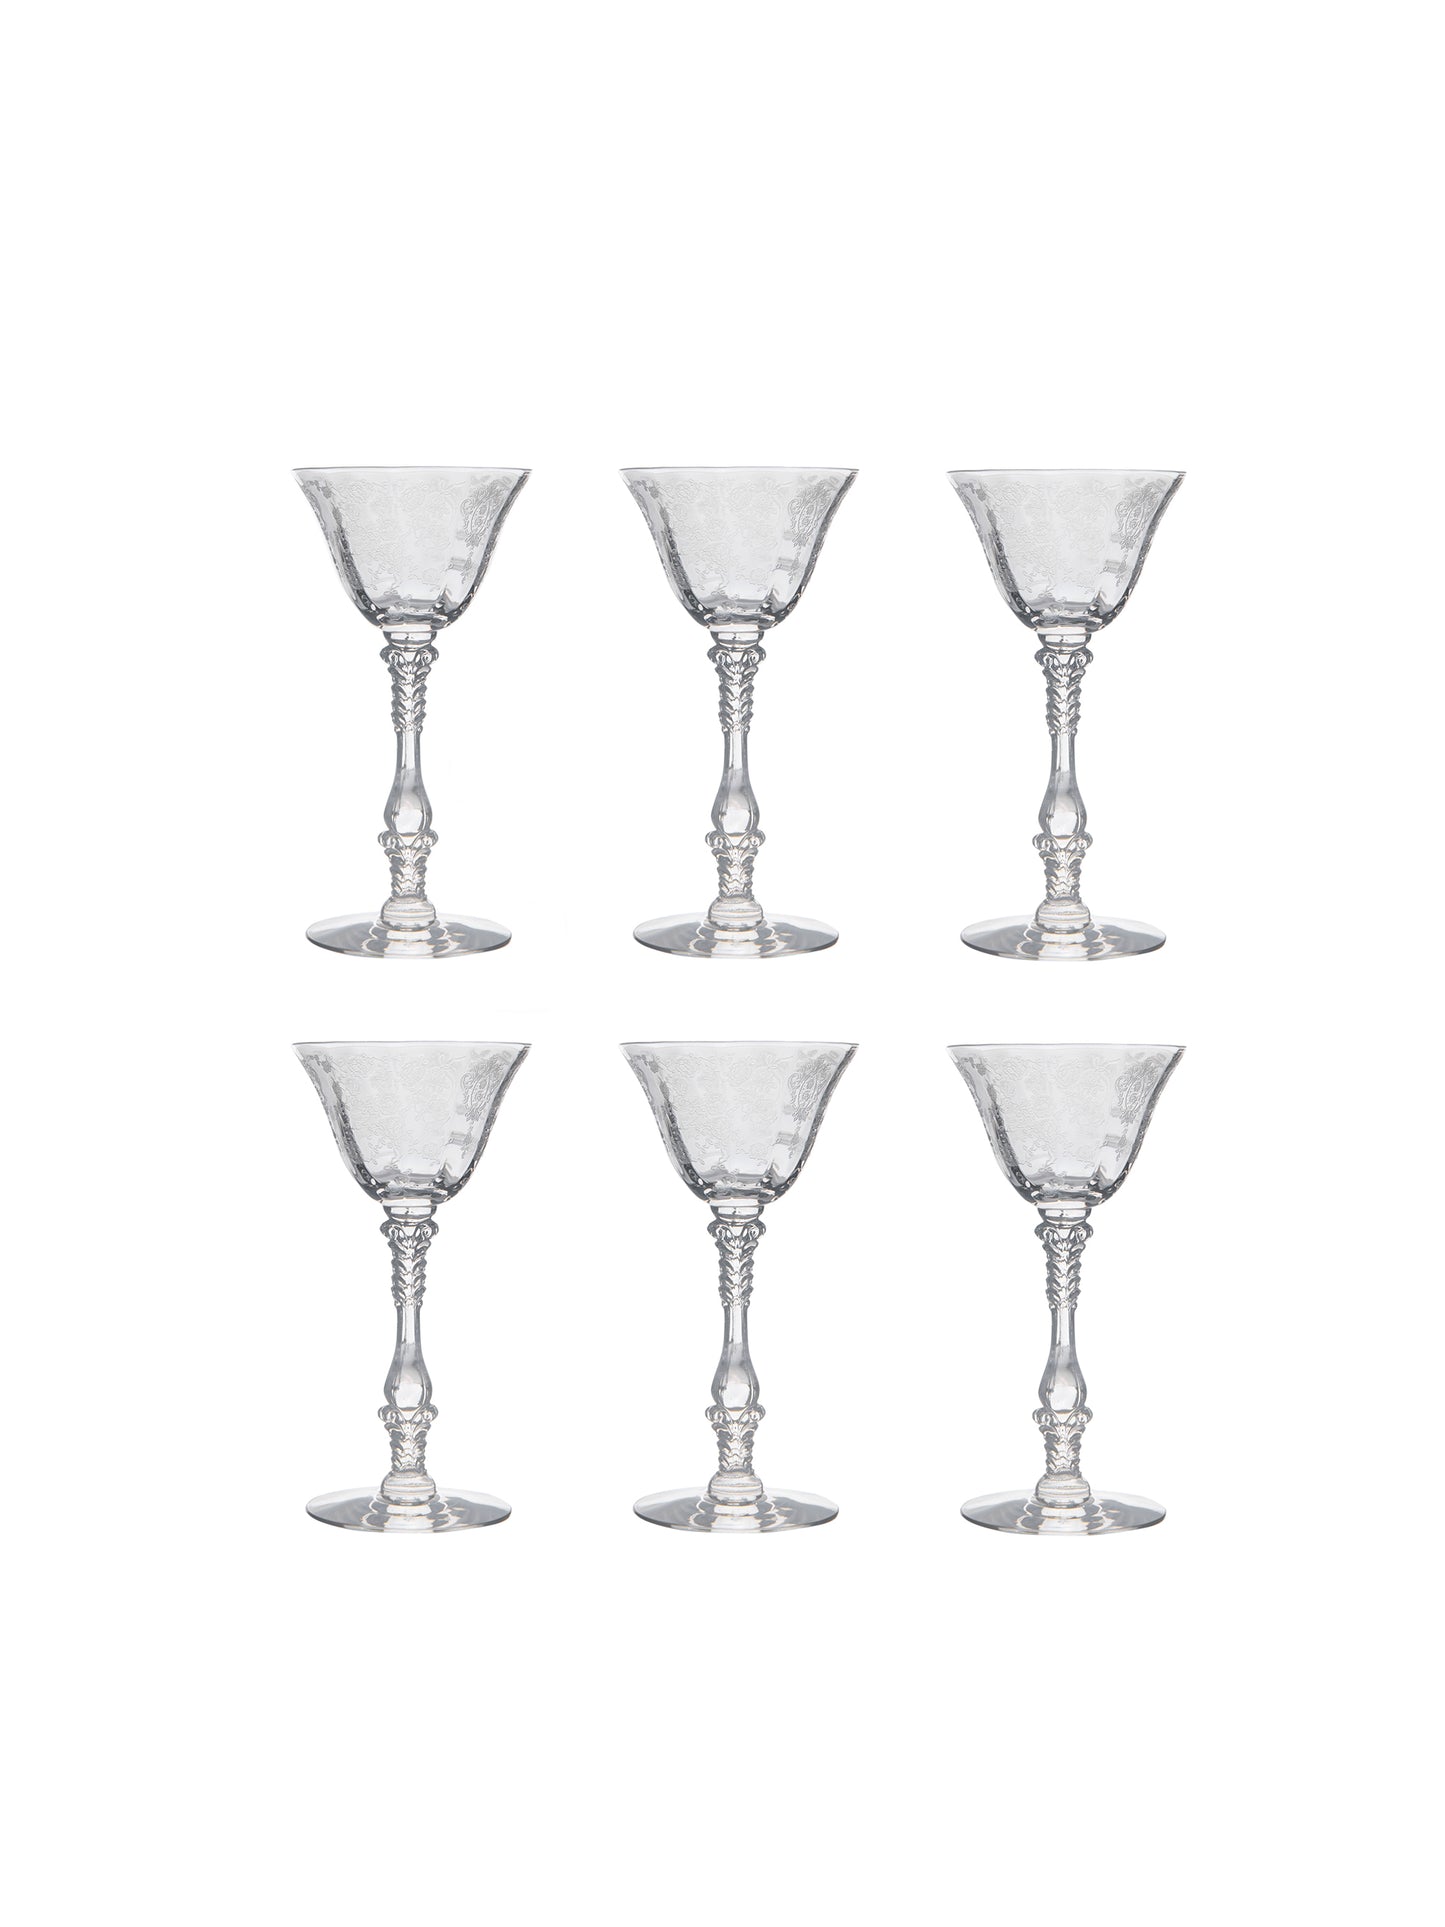 Shop the Vintage 1940s Grapes & Vine Etched Footed Collins Glasses at  Weston Table